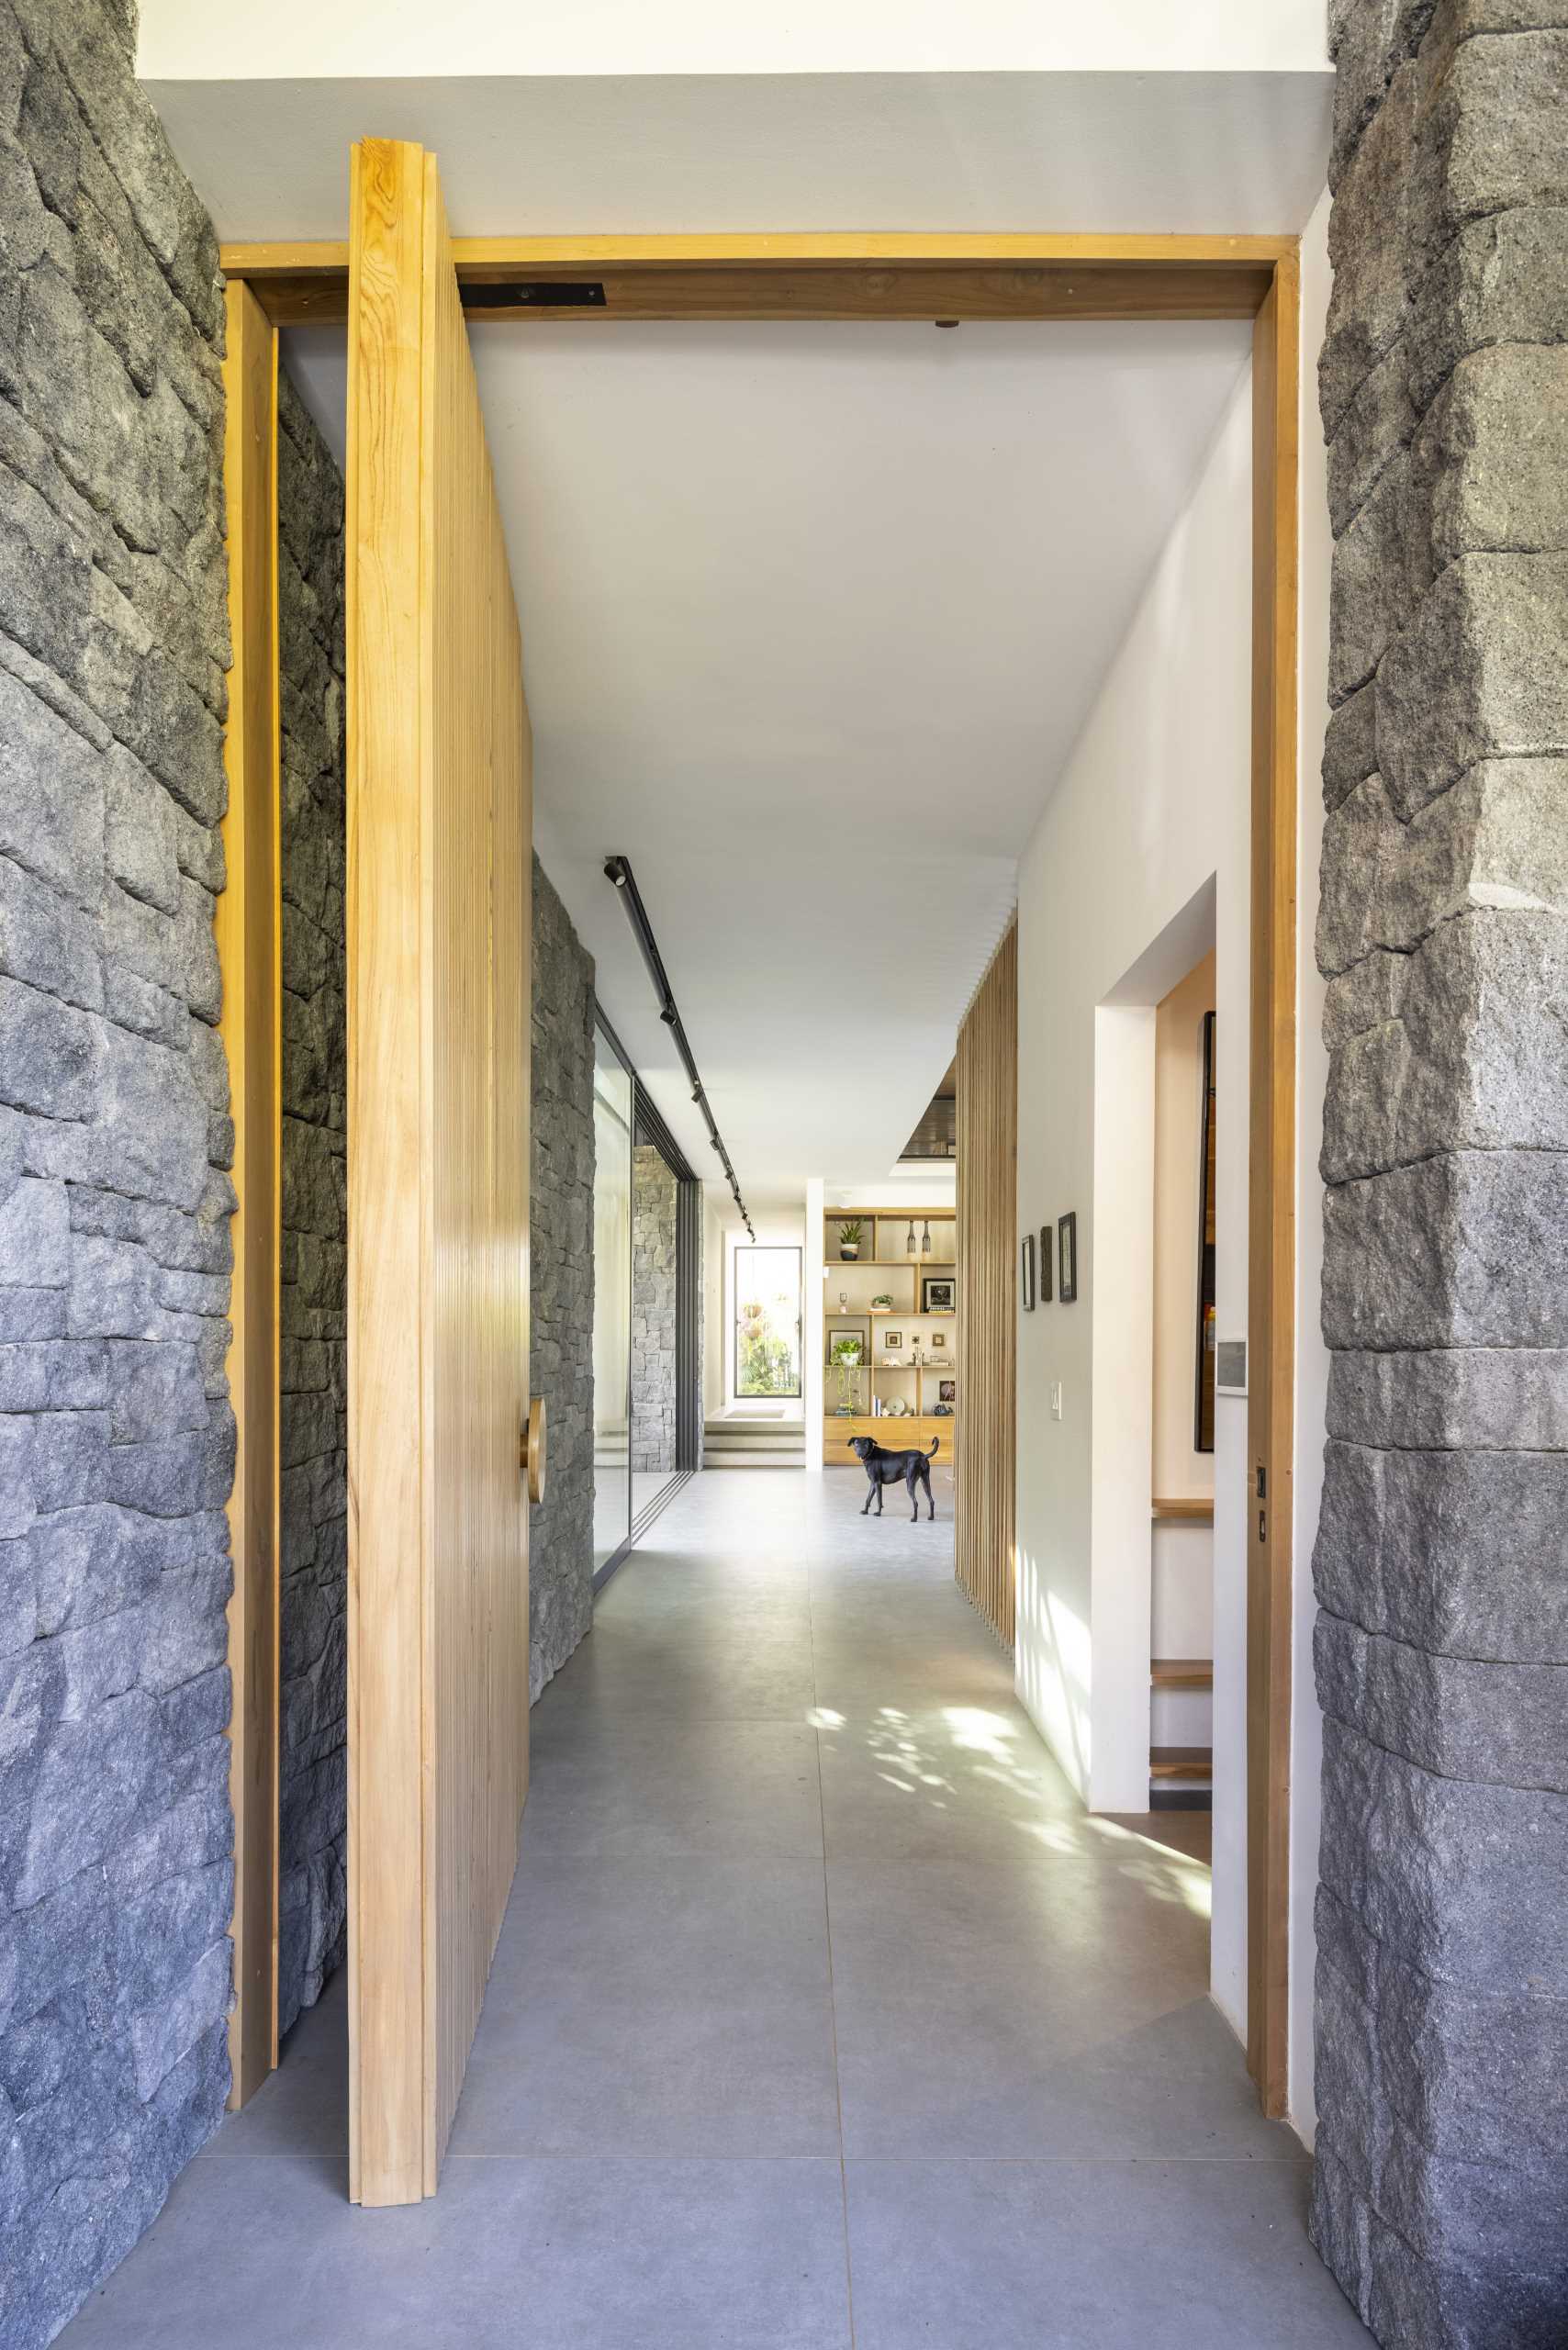 Stepping stone paths lead to the various entryways of this modern home.